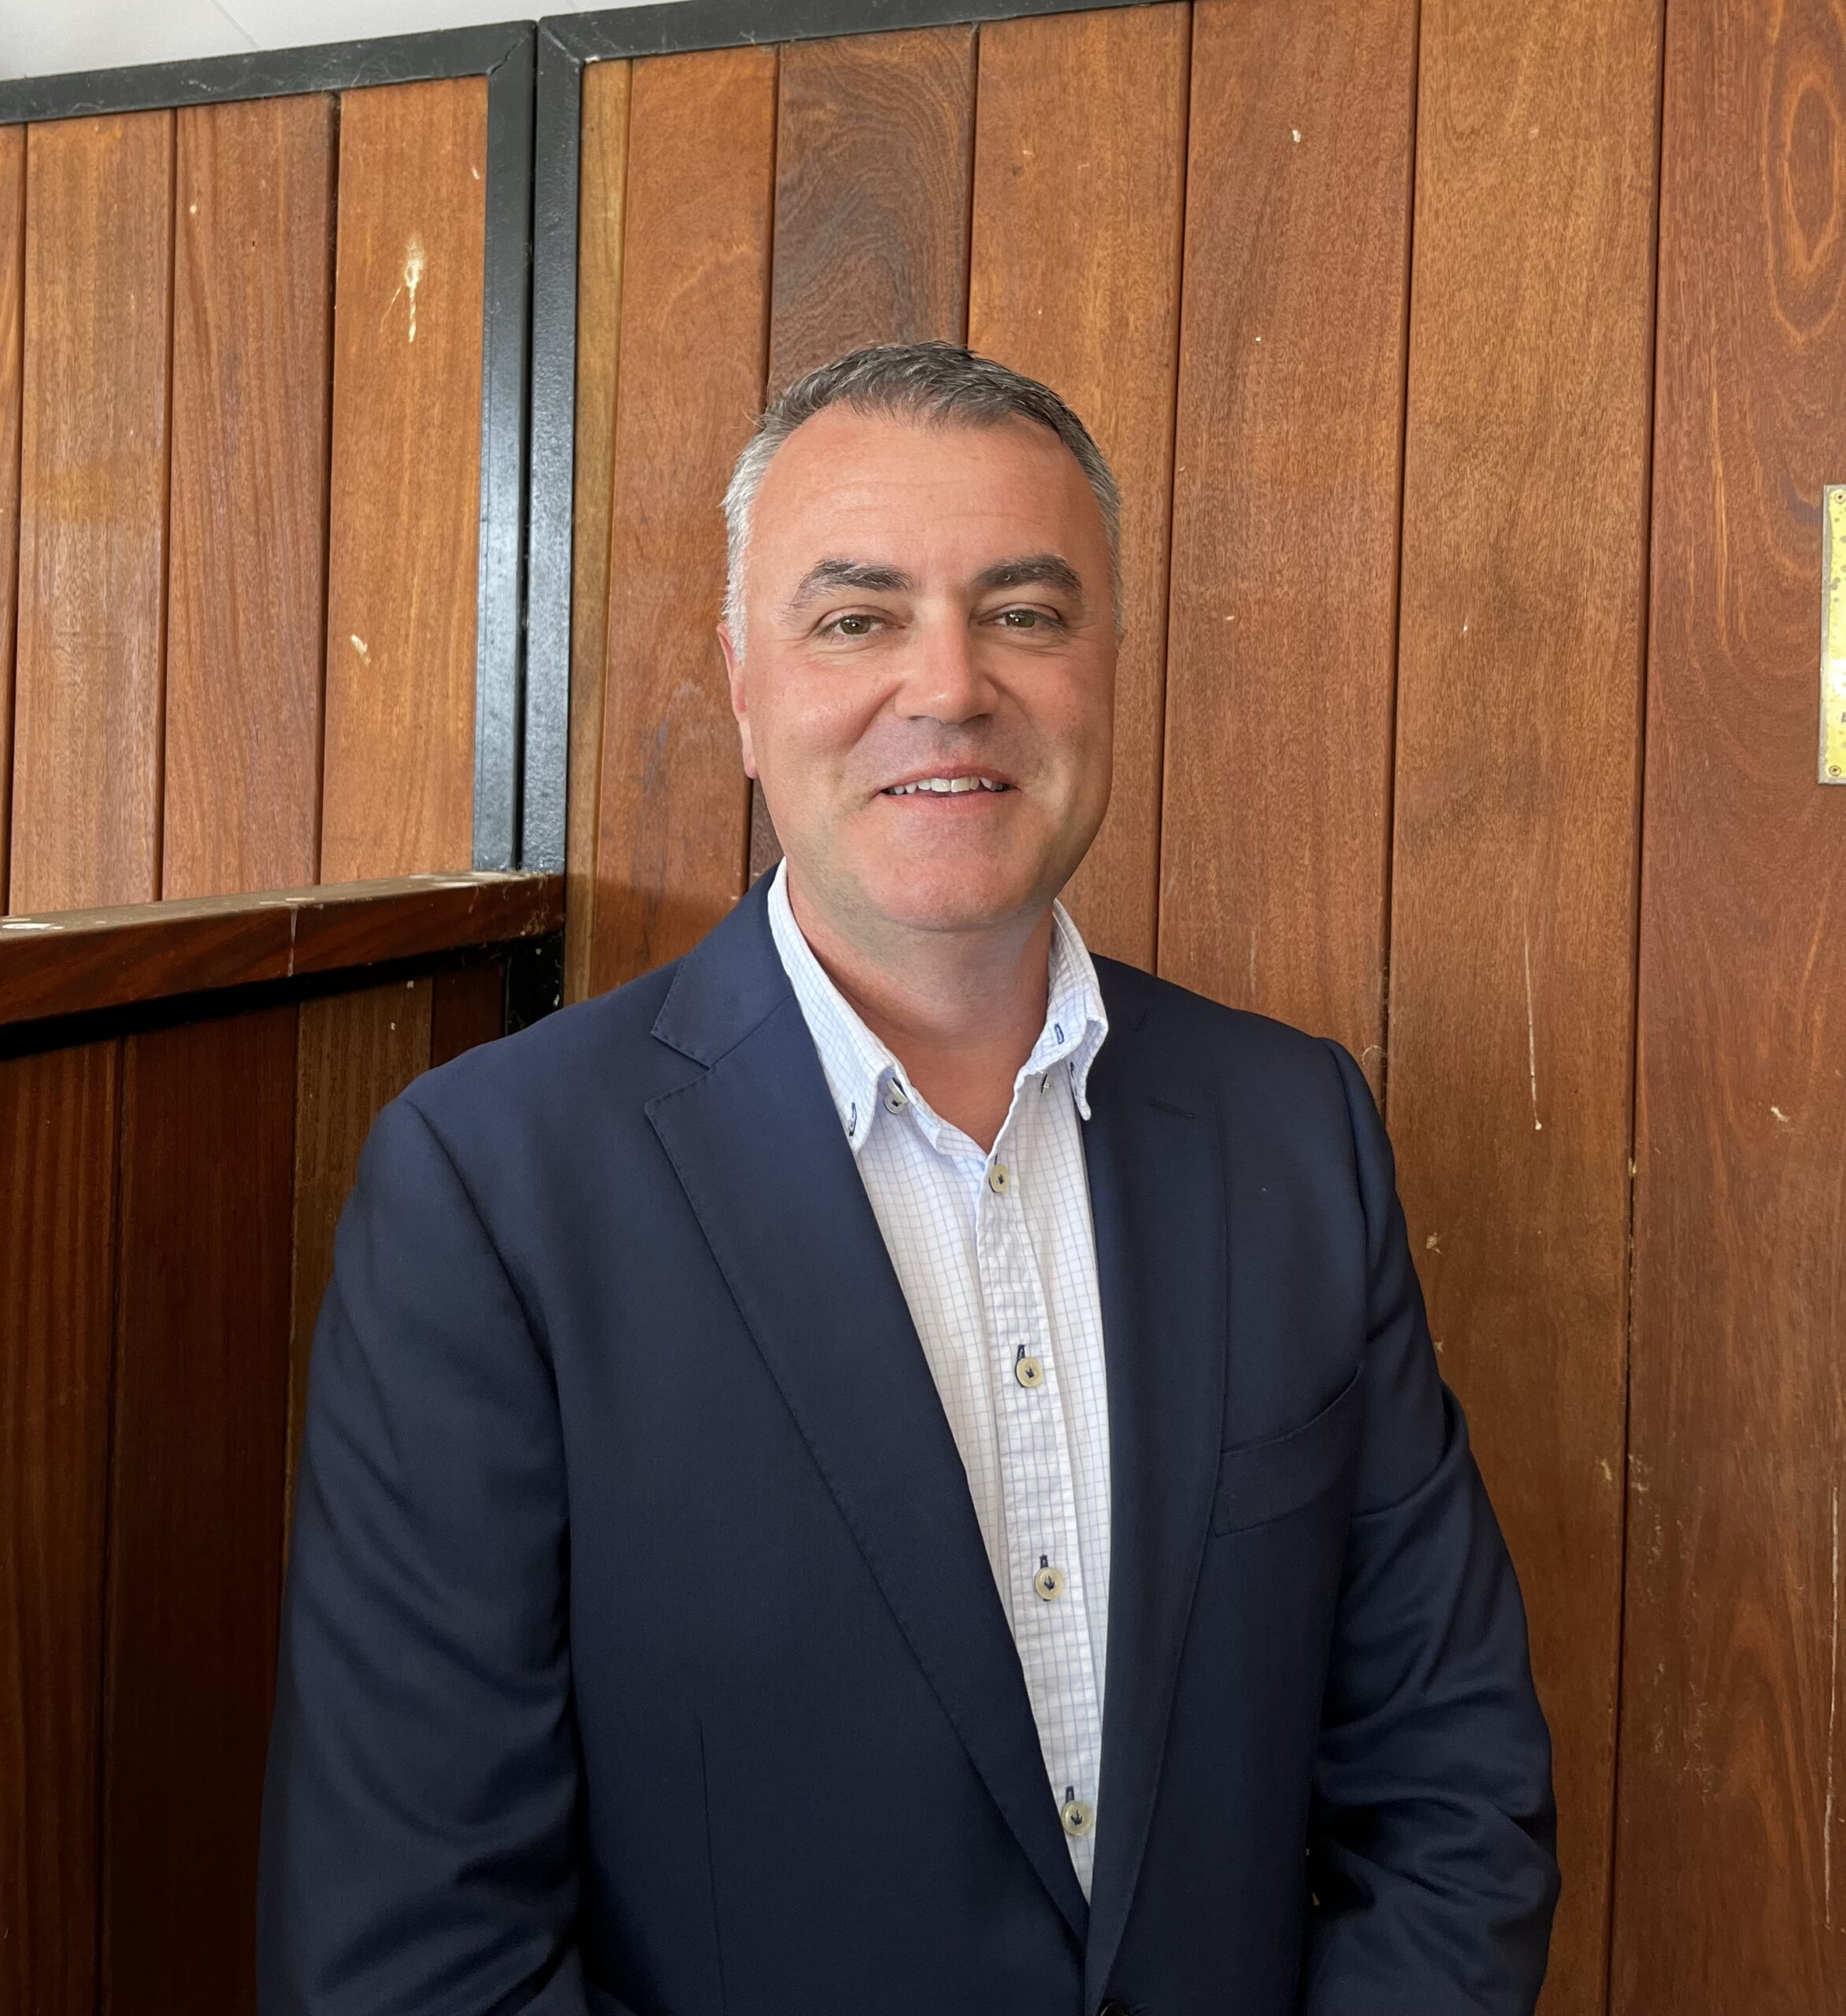 MEDIA RELEASE | Auckland Thoroughbred Racing appoints Gareth Jones as new CFO